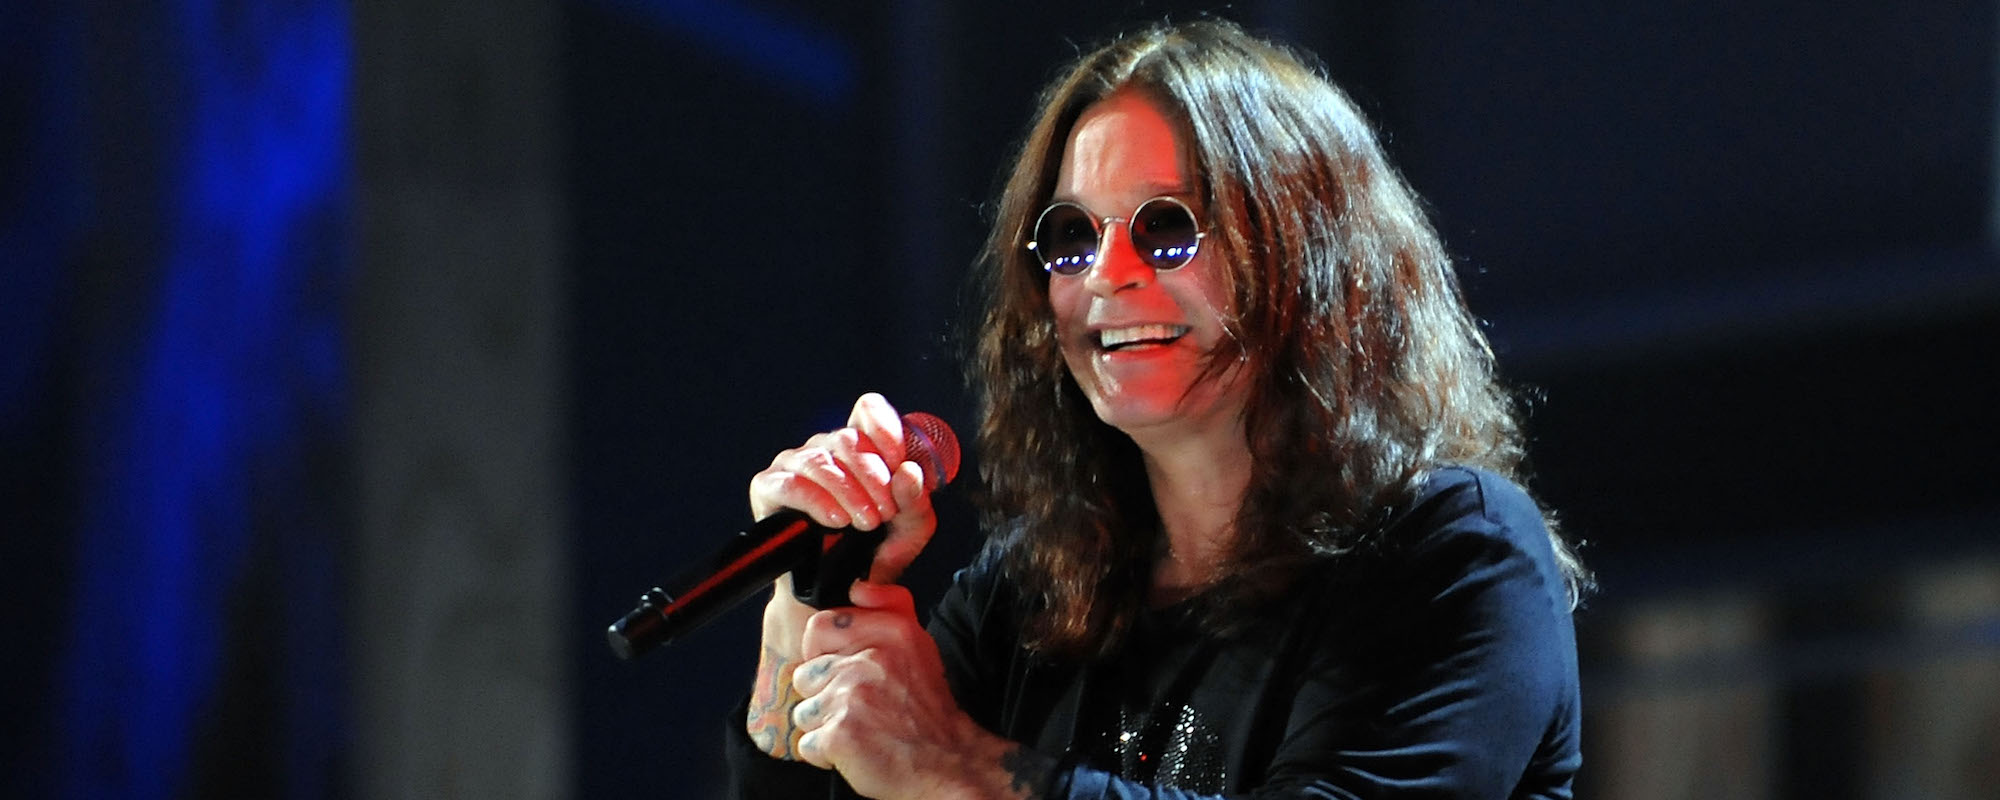 The Serial Killer Meaning Behind Ozzy Osbourne’s Resurrecting Hit “No More Tears”